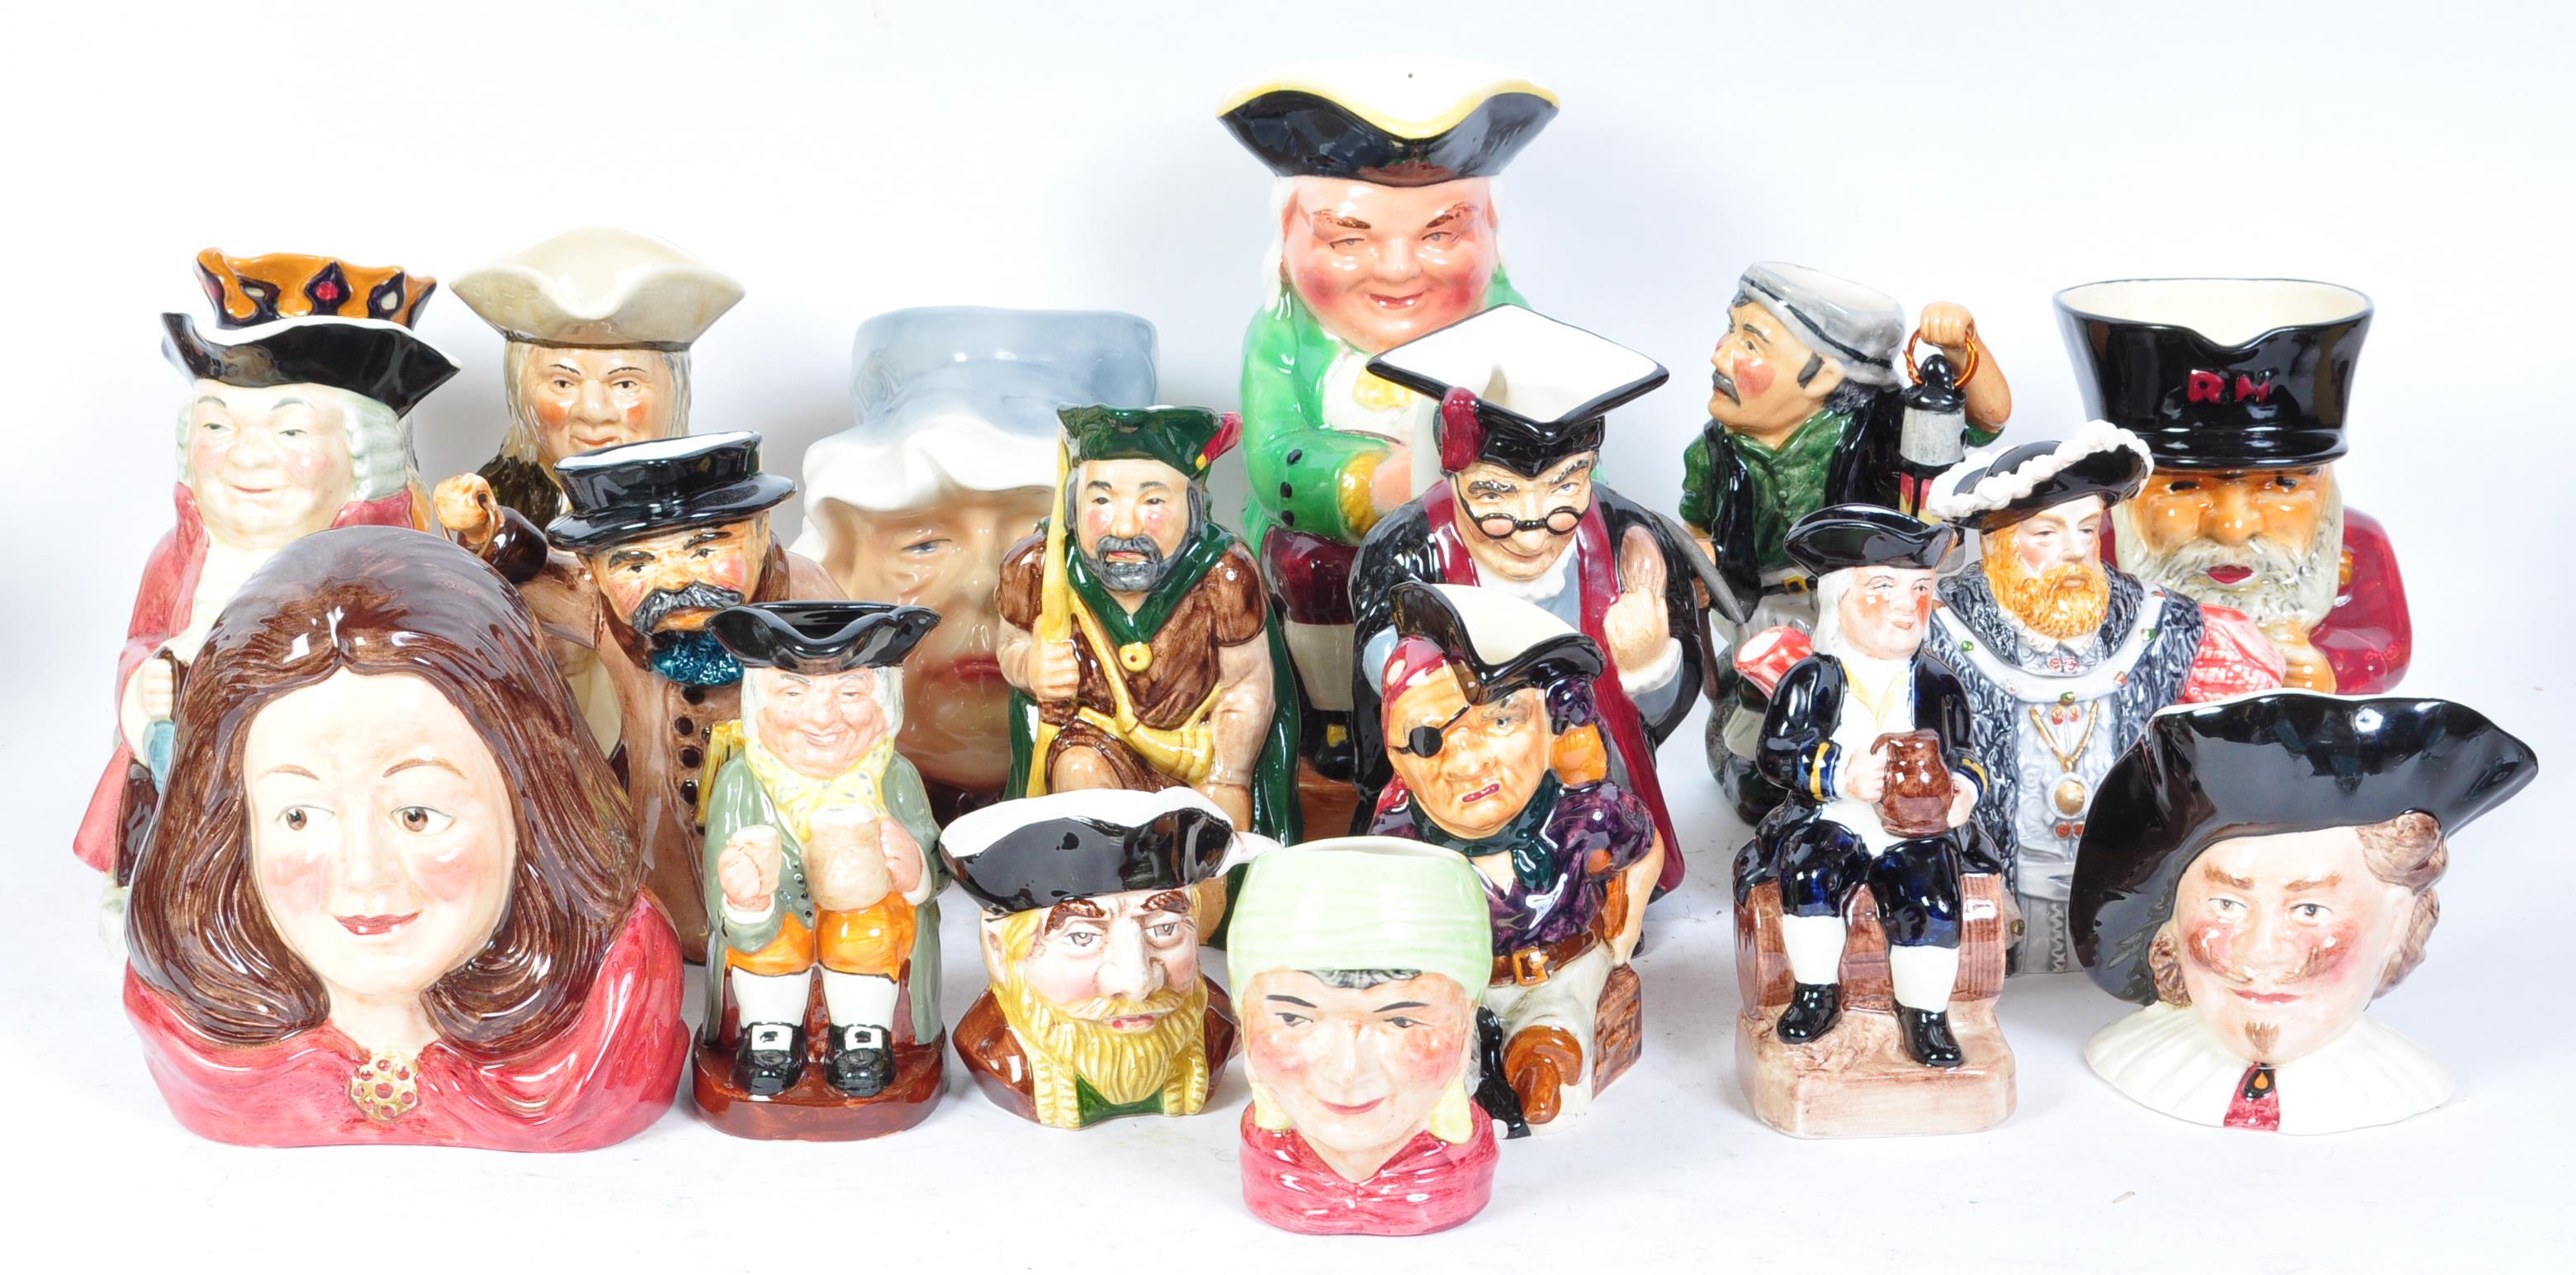 A LARGE COLLECTION OF VINTAGE CERAMIC TOBY JUGS